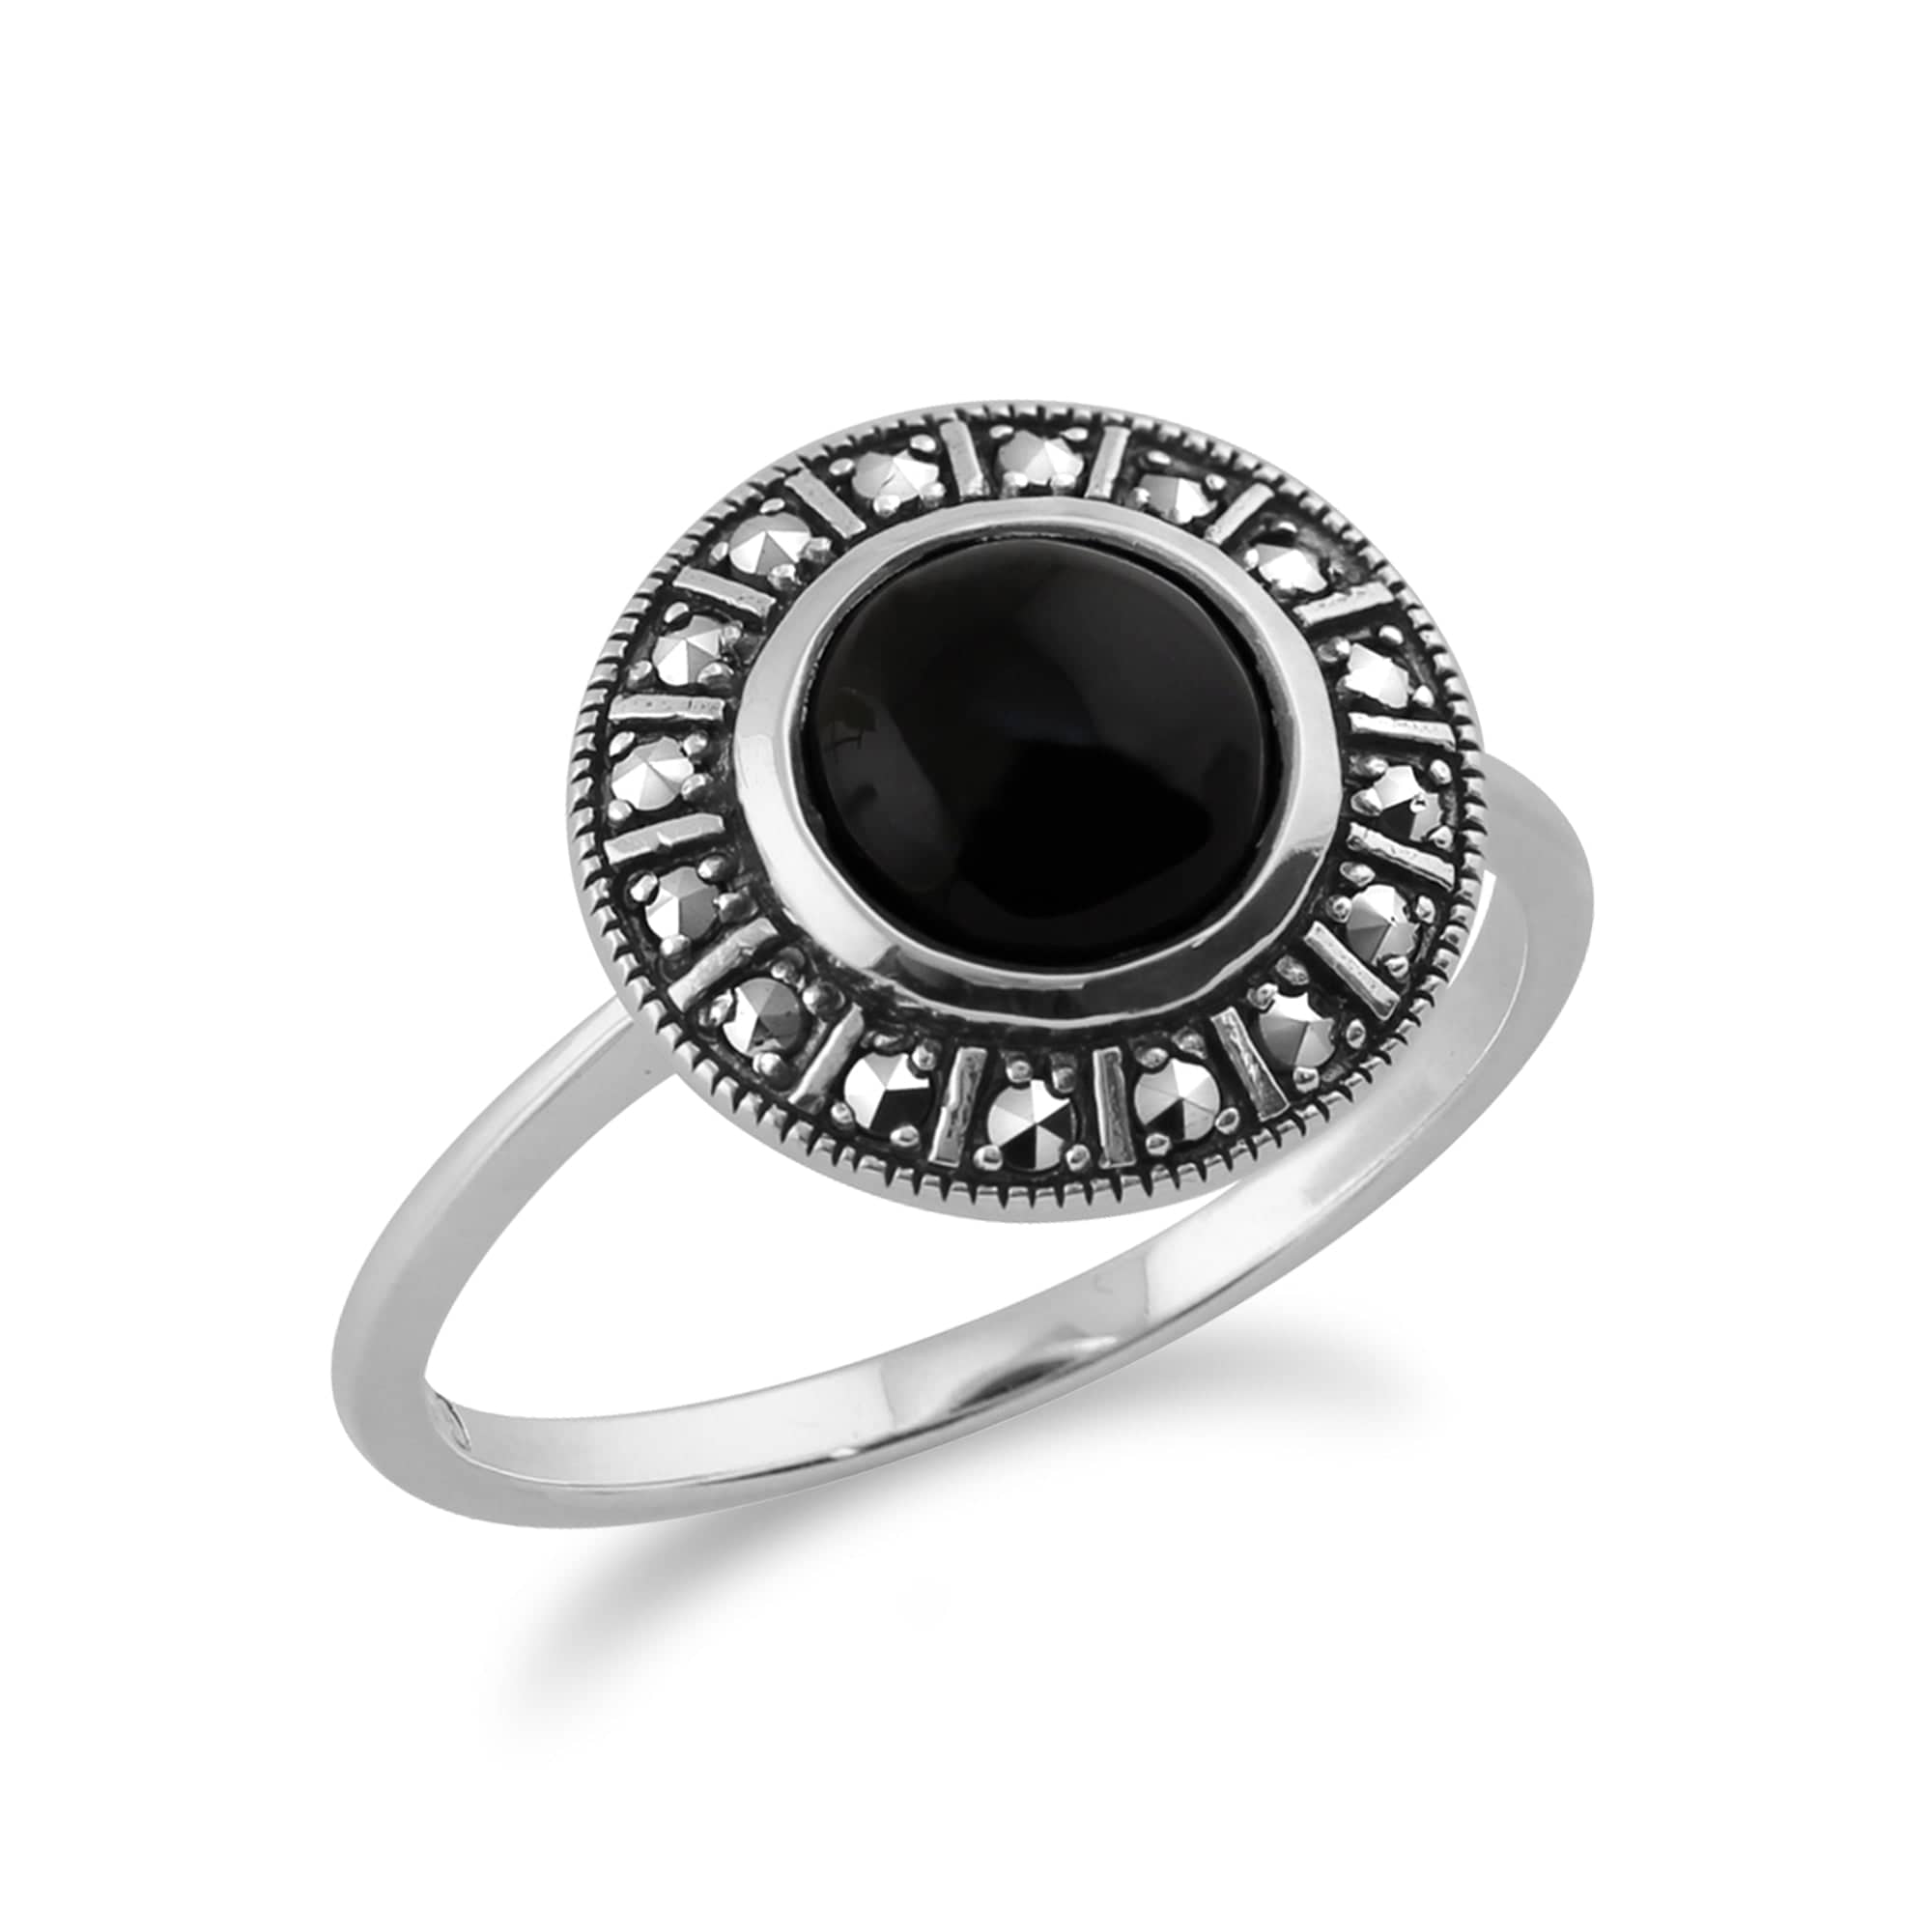 214R513402925 Art Deco Style Round Black Onyx Cabochon & Marcasite Halo Ring in 925 Sterling Silver 2